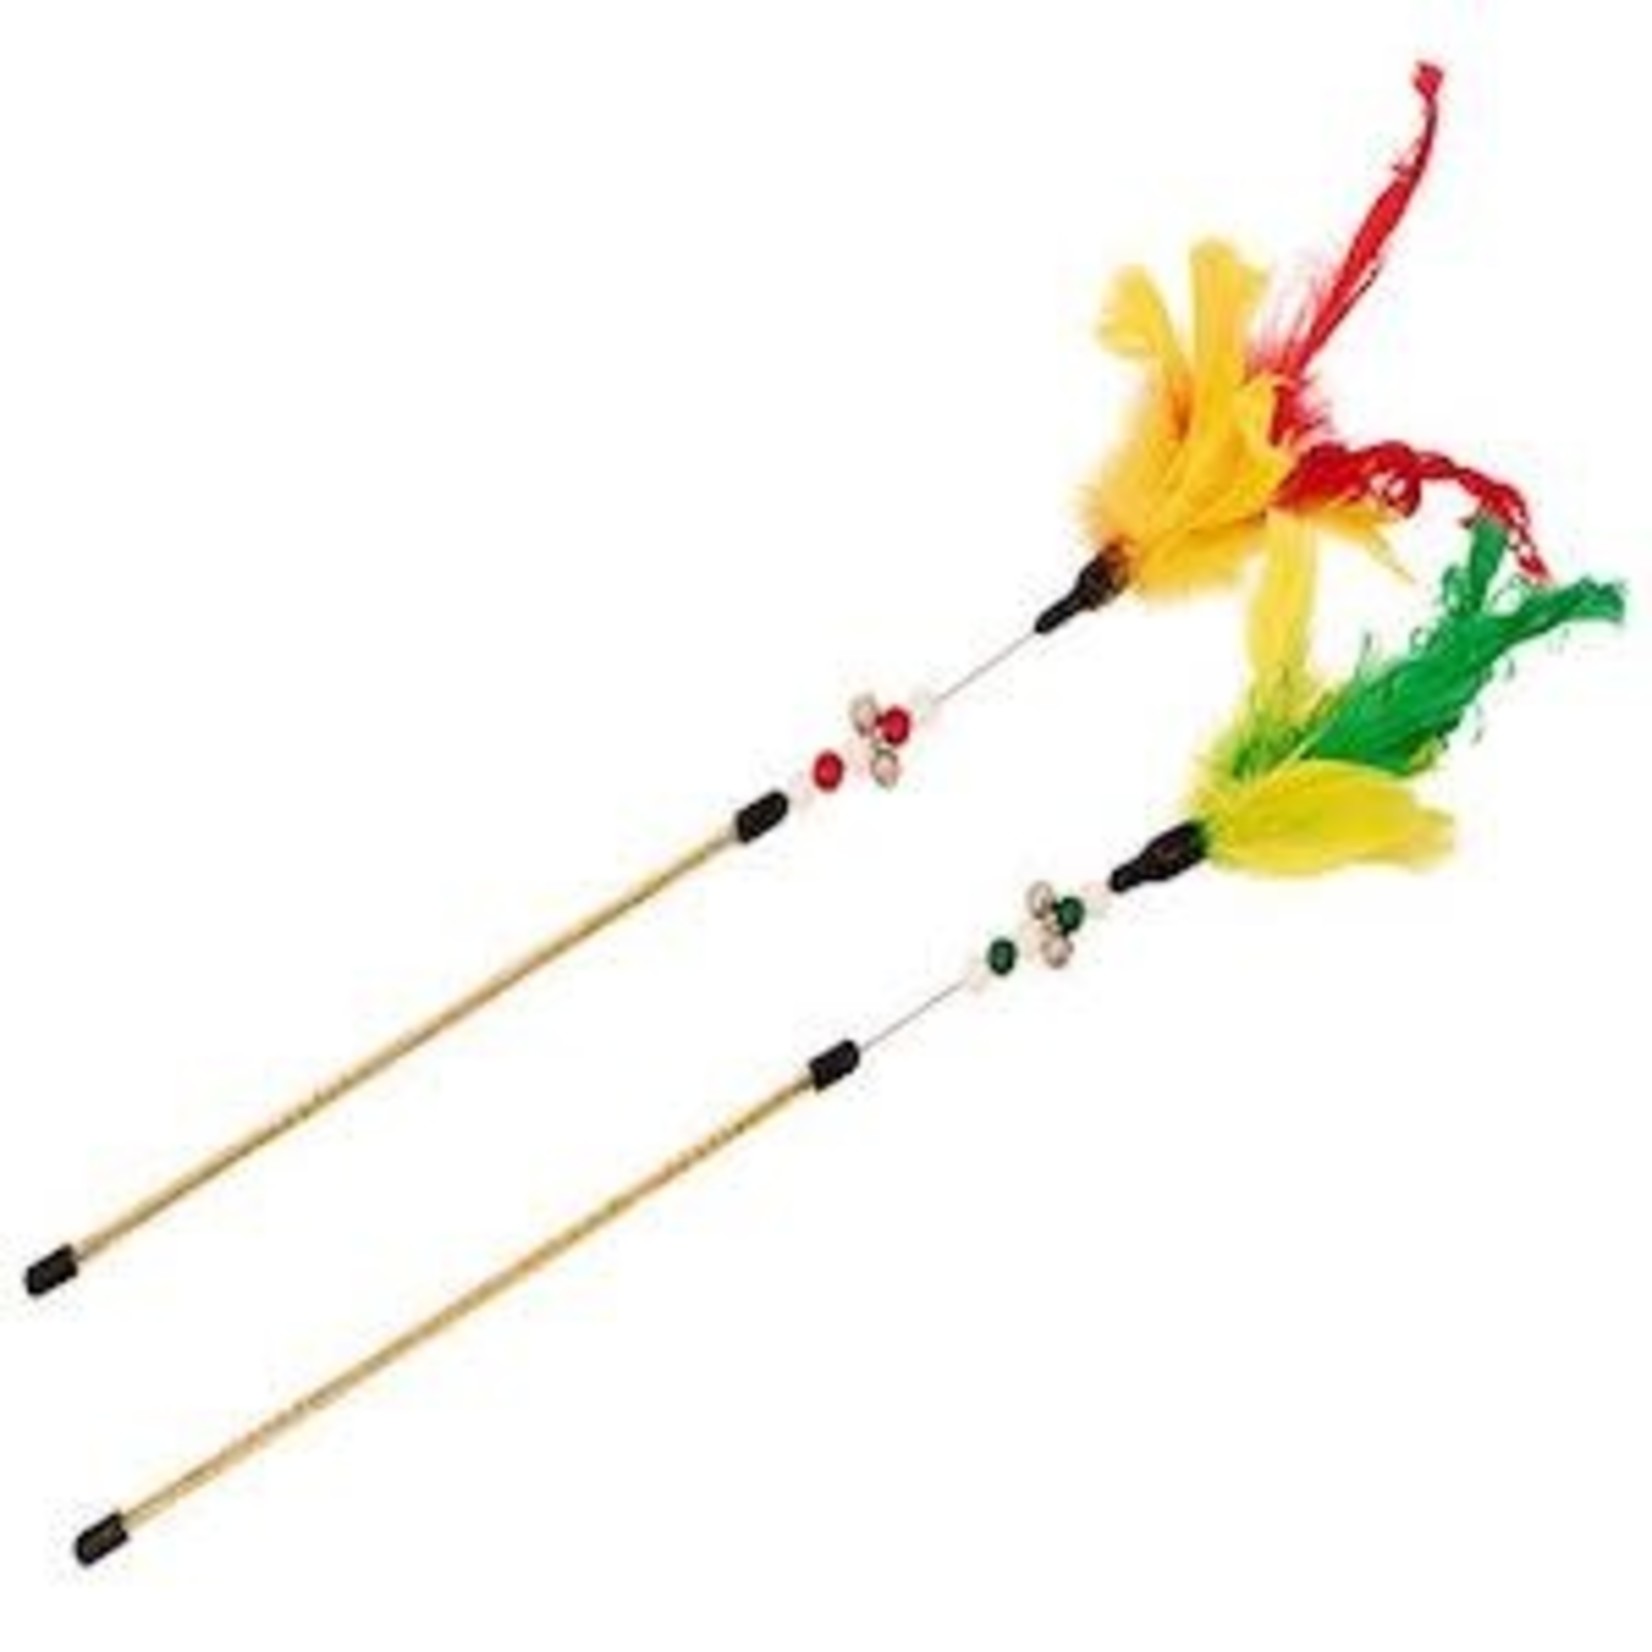 BUD-Z Bud-Z Feather Duster Toy For Cats Budgie